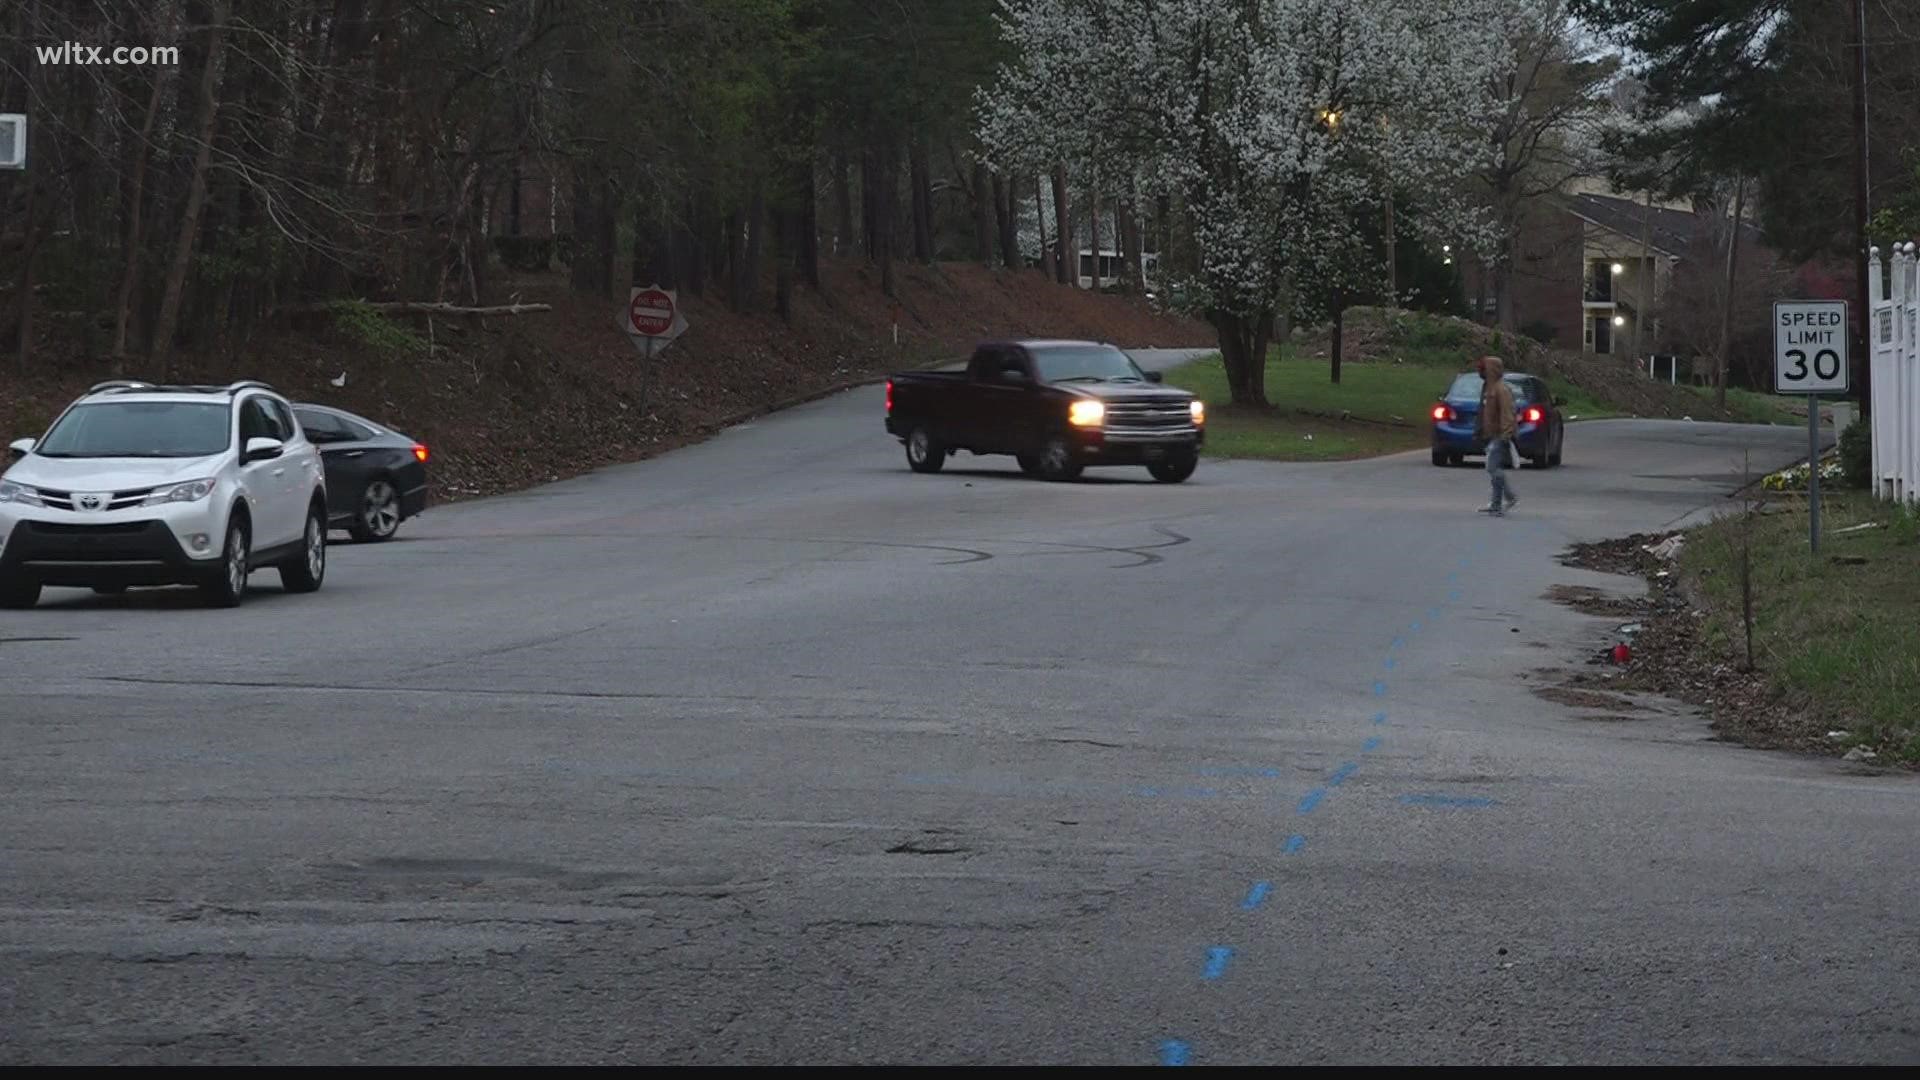 Some in the Broad River Road area want Longcreek Drive to be turned into a one-way street in an effort to reduce crime.